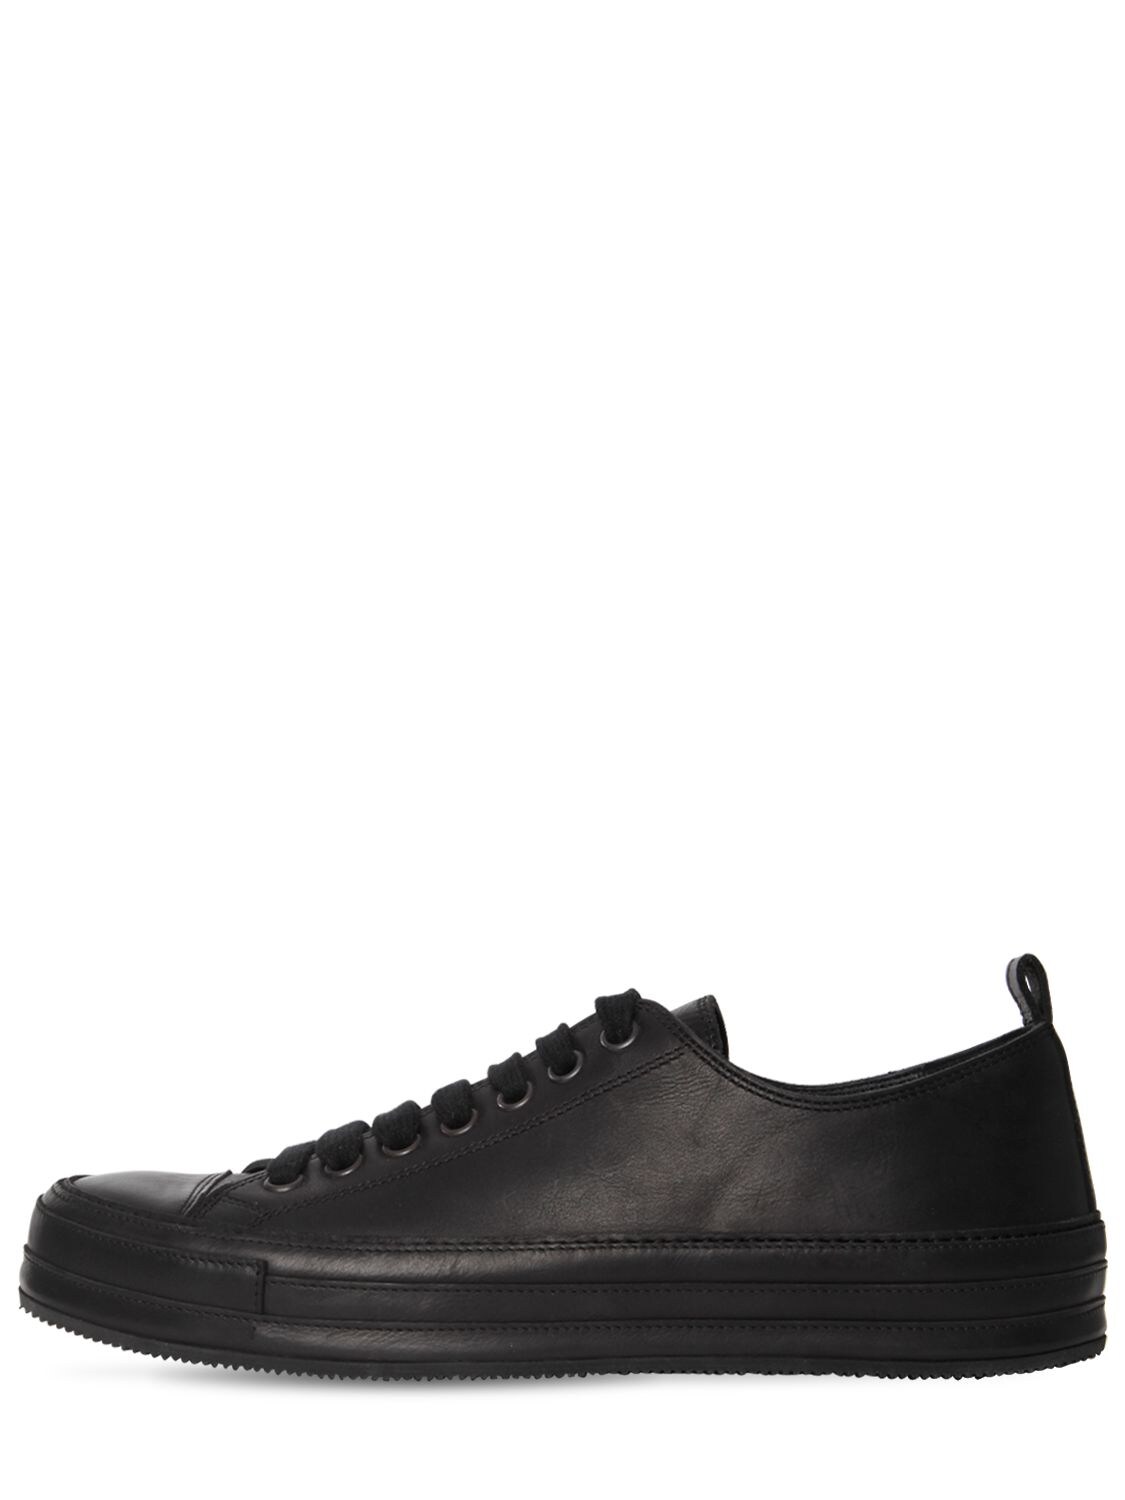 ANN DEMEULEMEESTER LEATHER LOW SNEAKERS,72IA5I007-MDK50